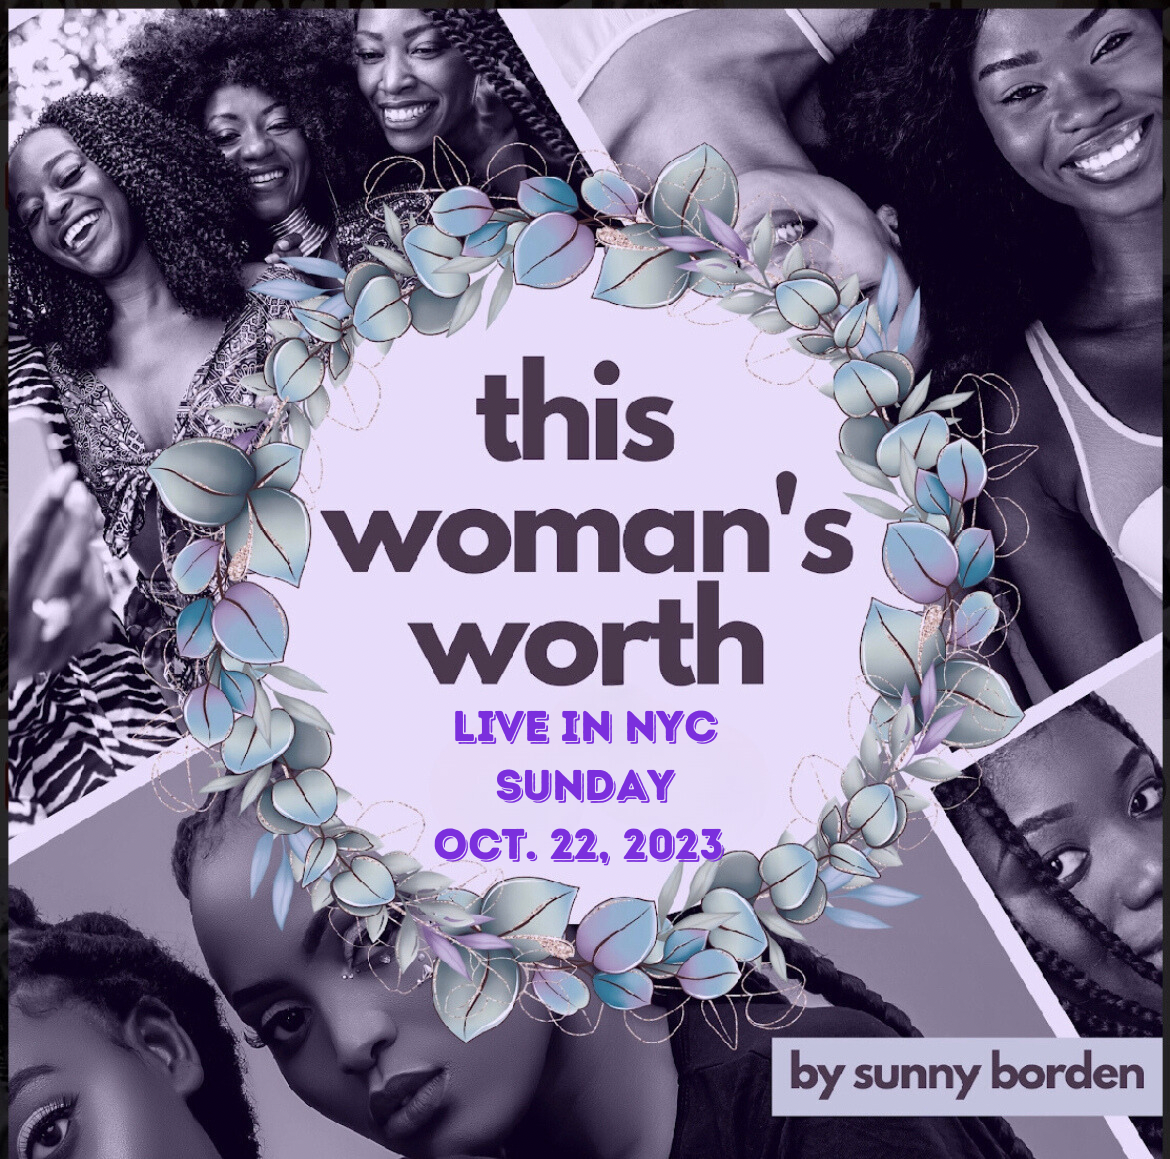 This Woman's Worth: Live In NYC - ADMISSION